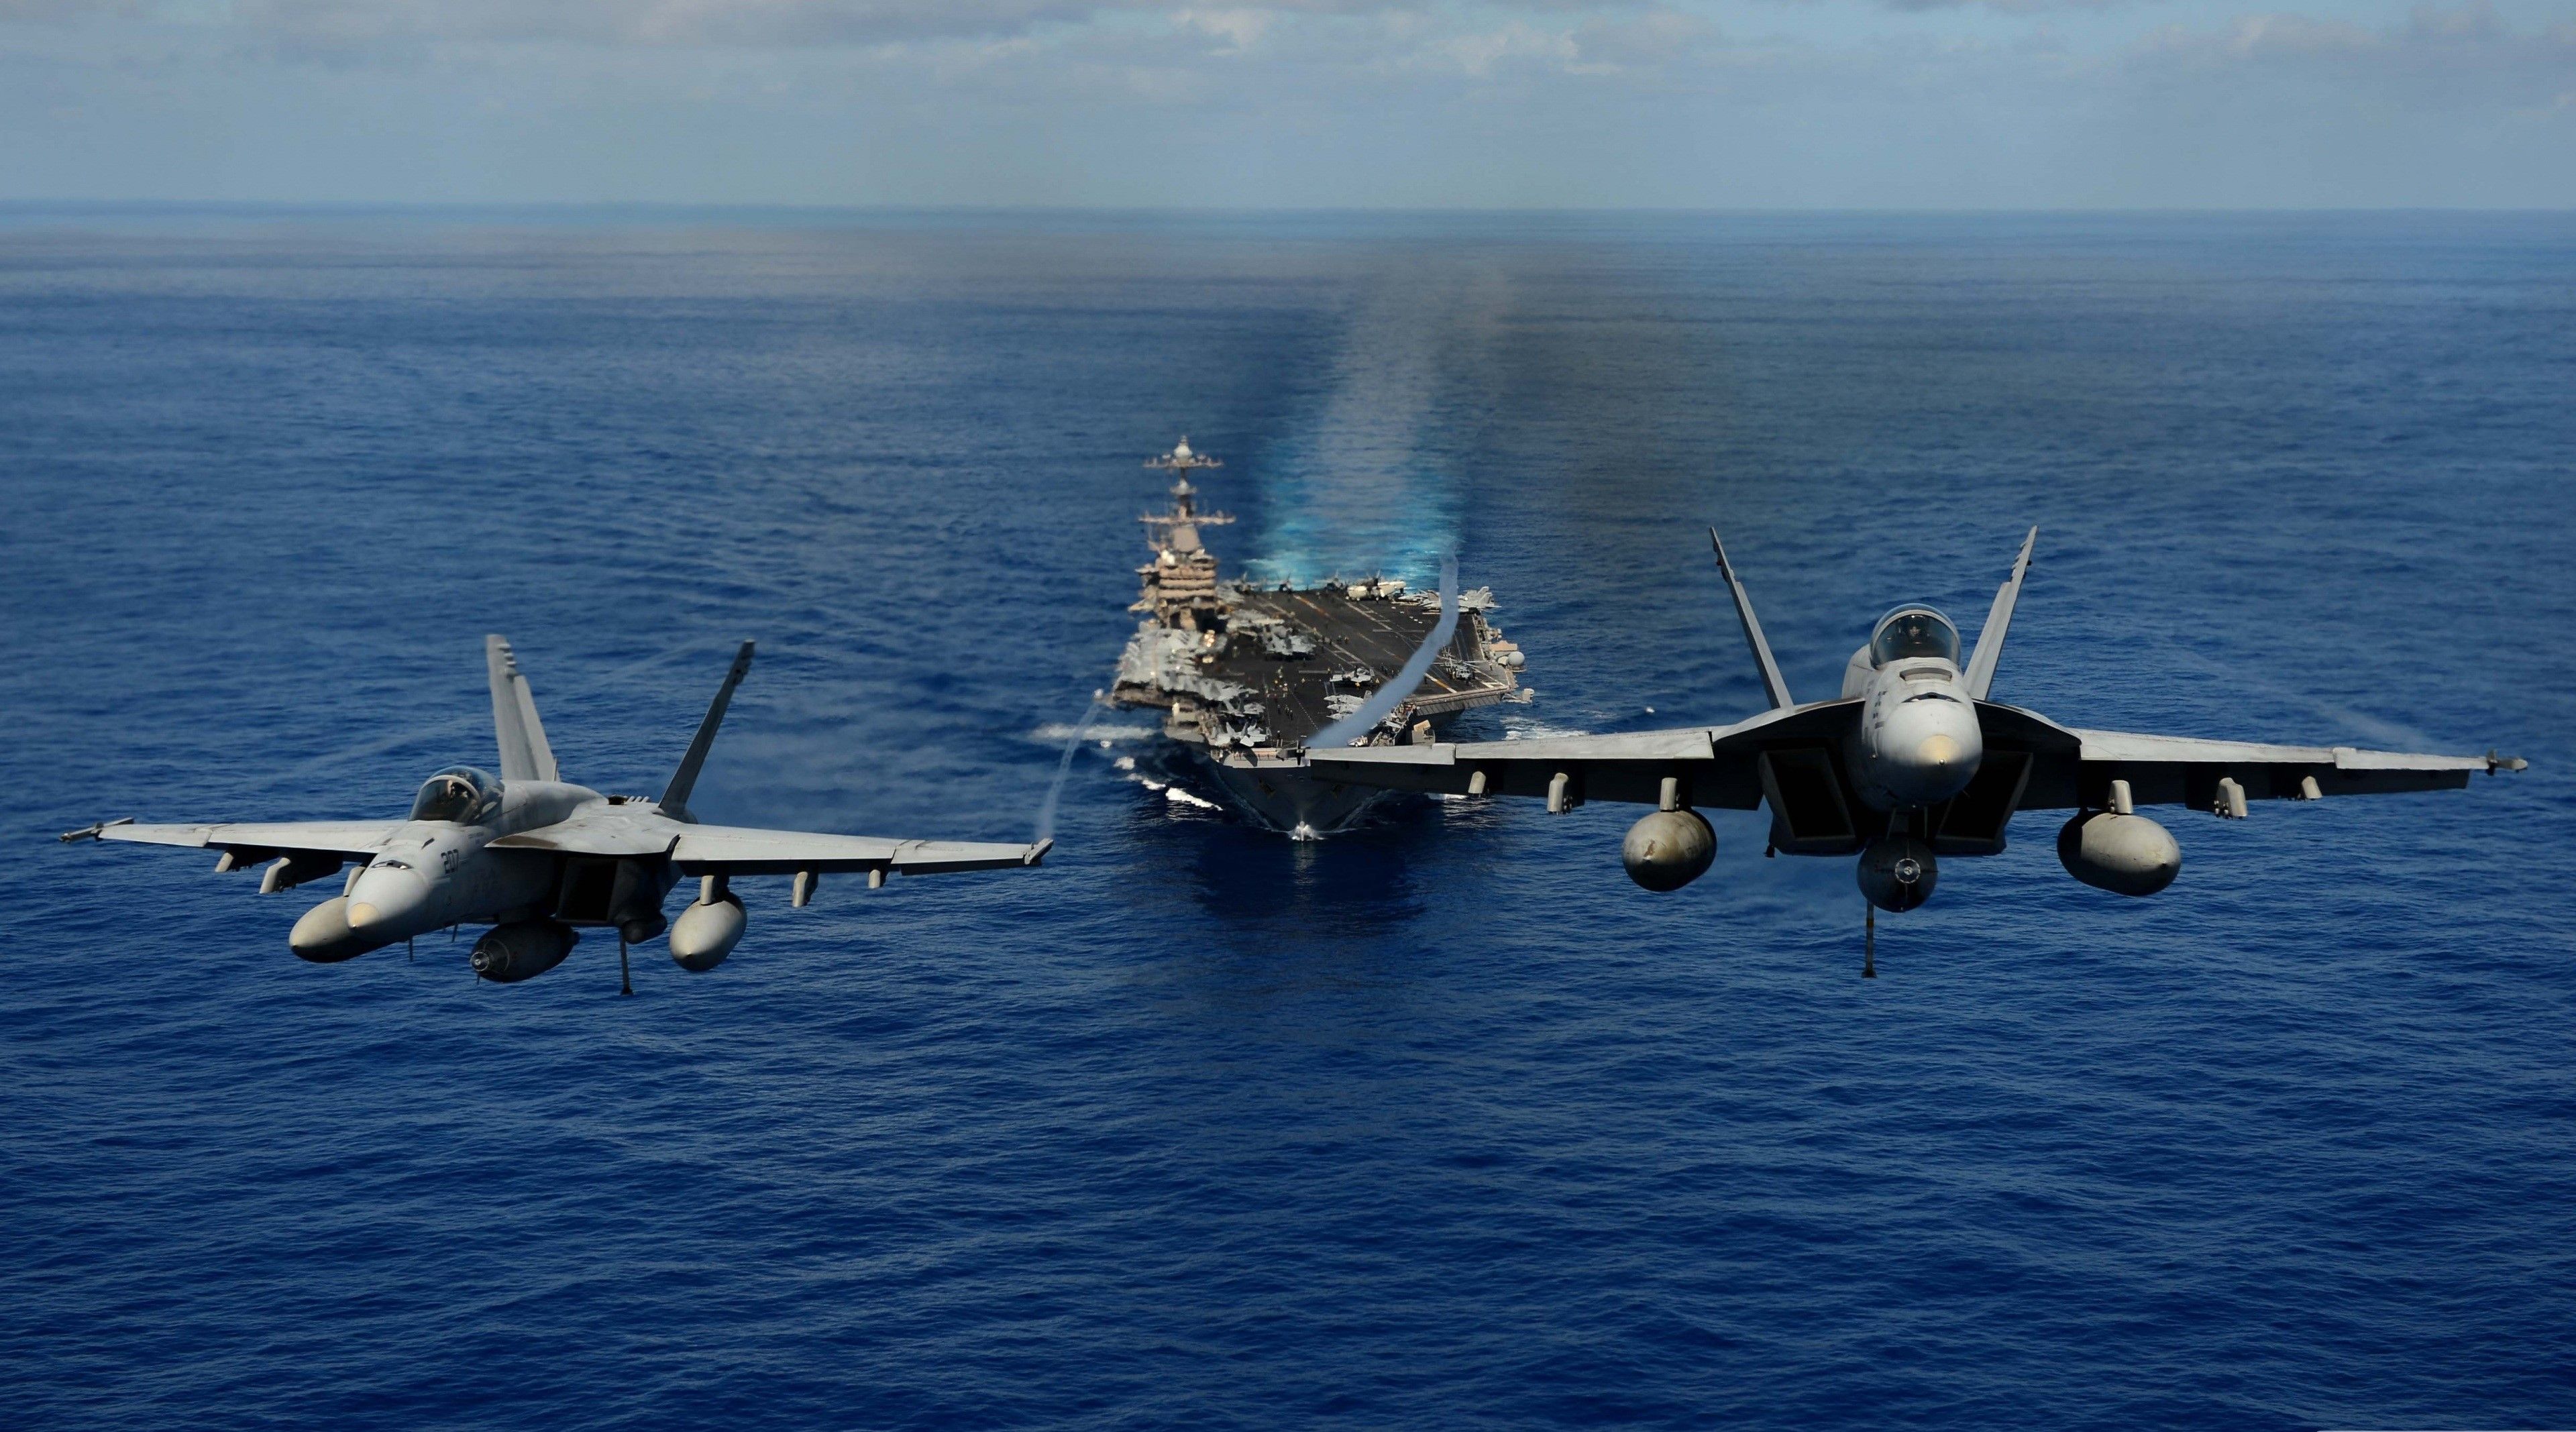 Navy two fighters aircraft carrier HD wallpaper, Background